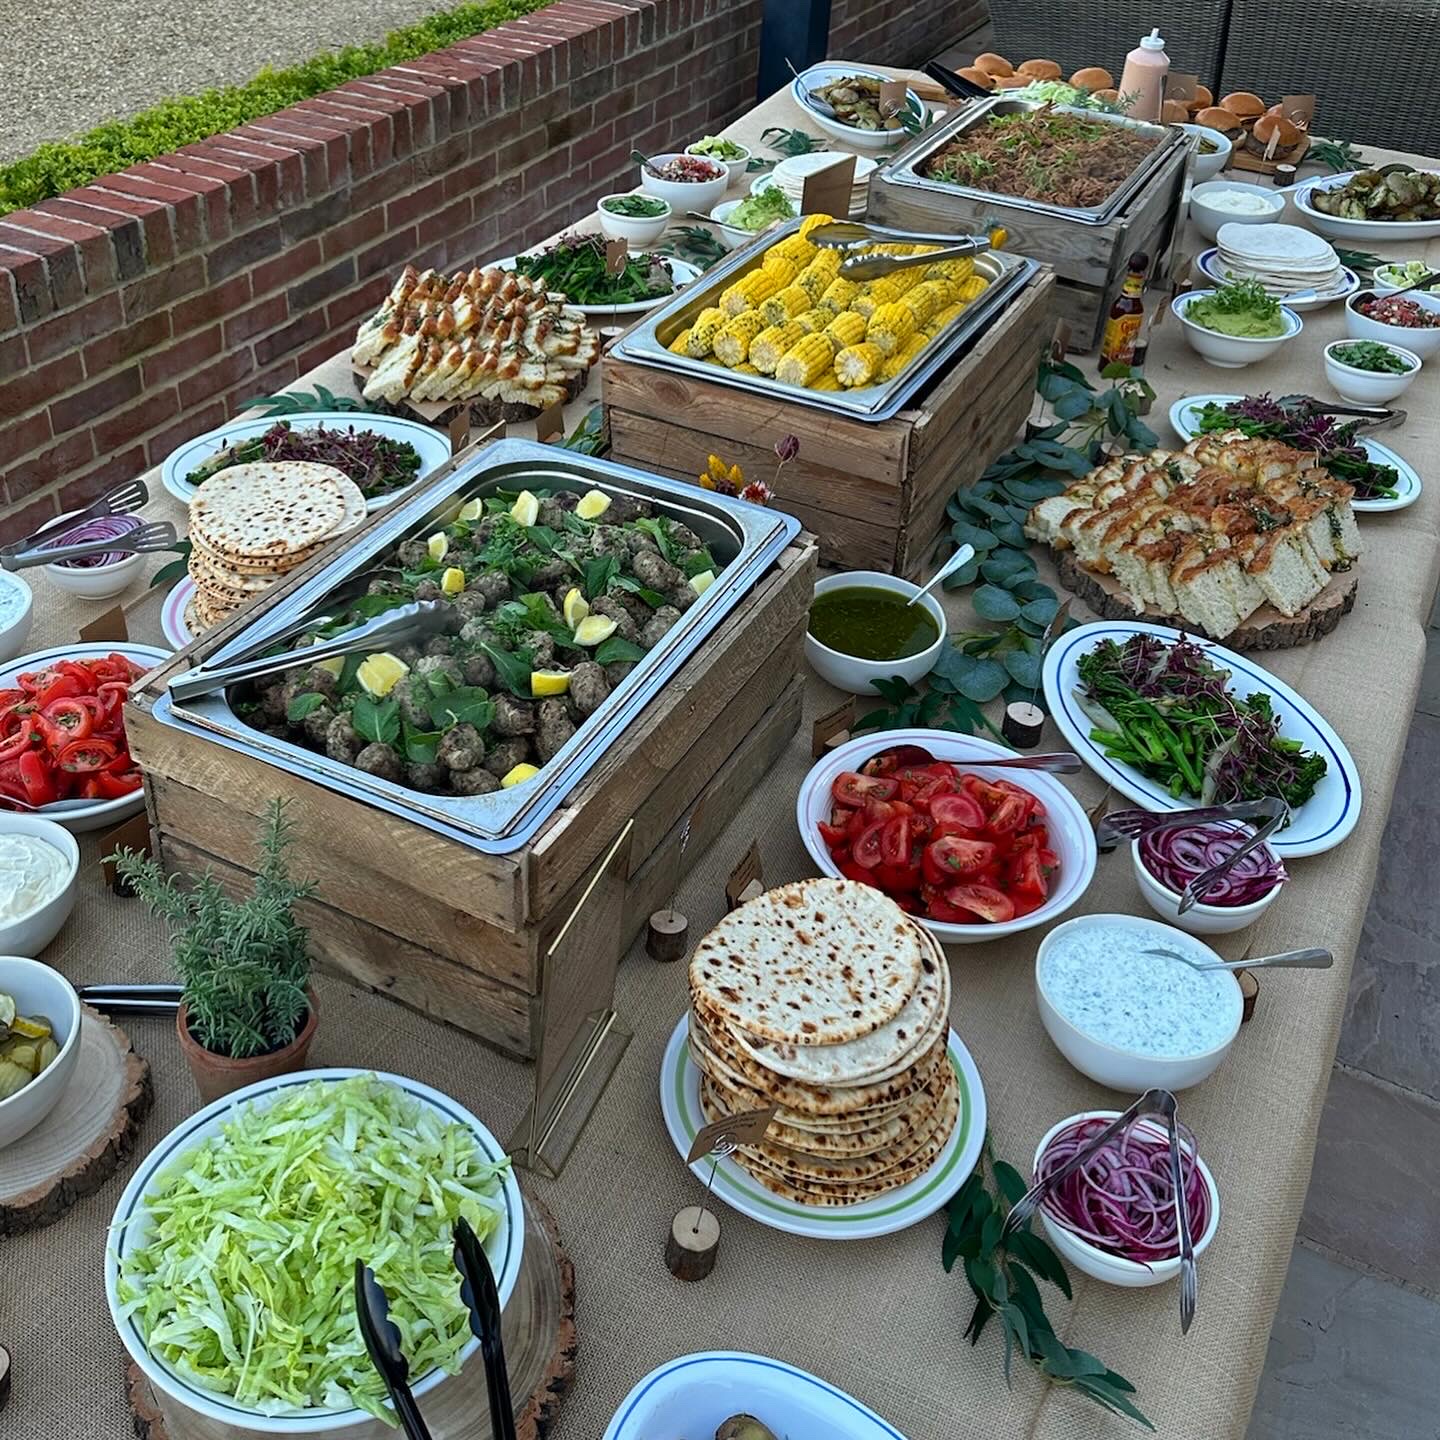 Outside BBQ catering table spread with accompaniments and side dishes to grilled meats.